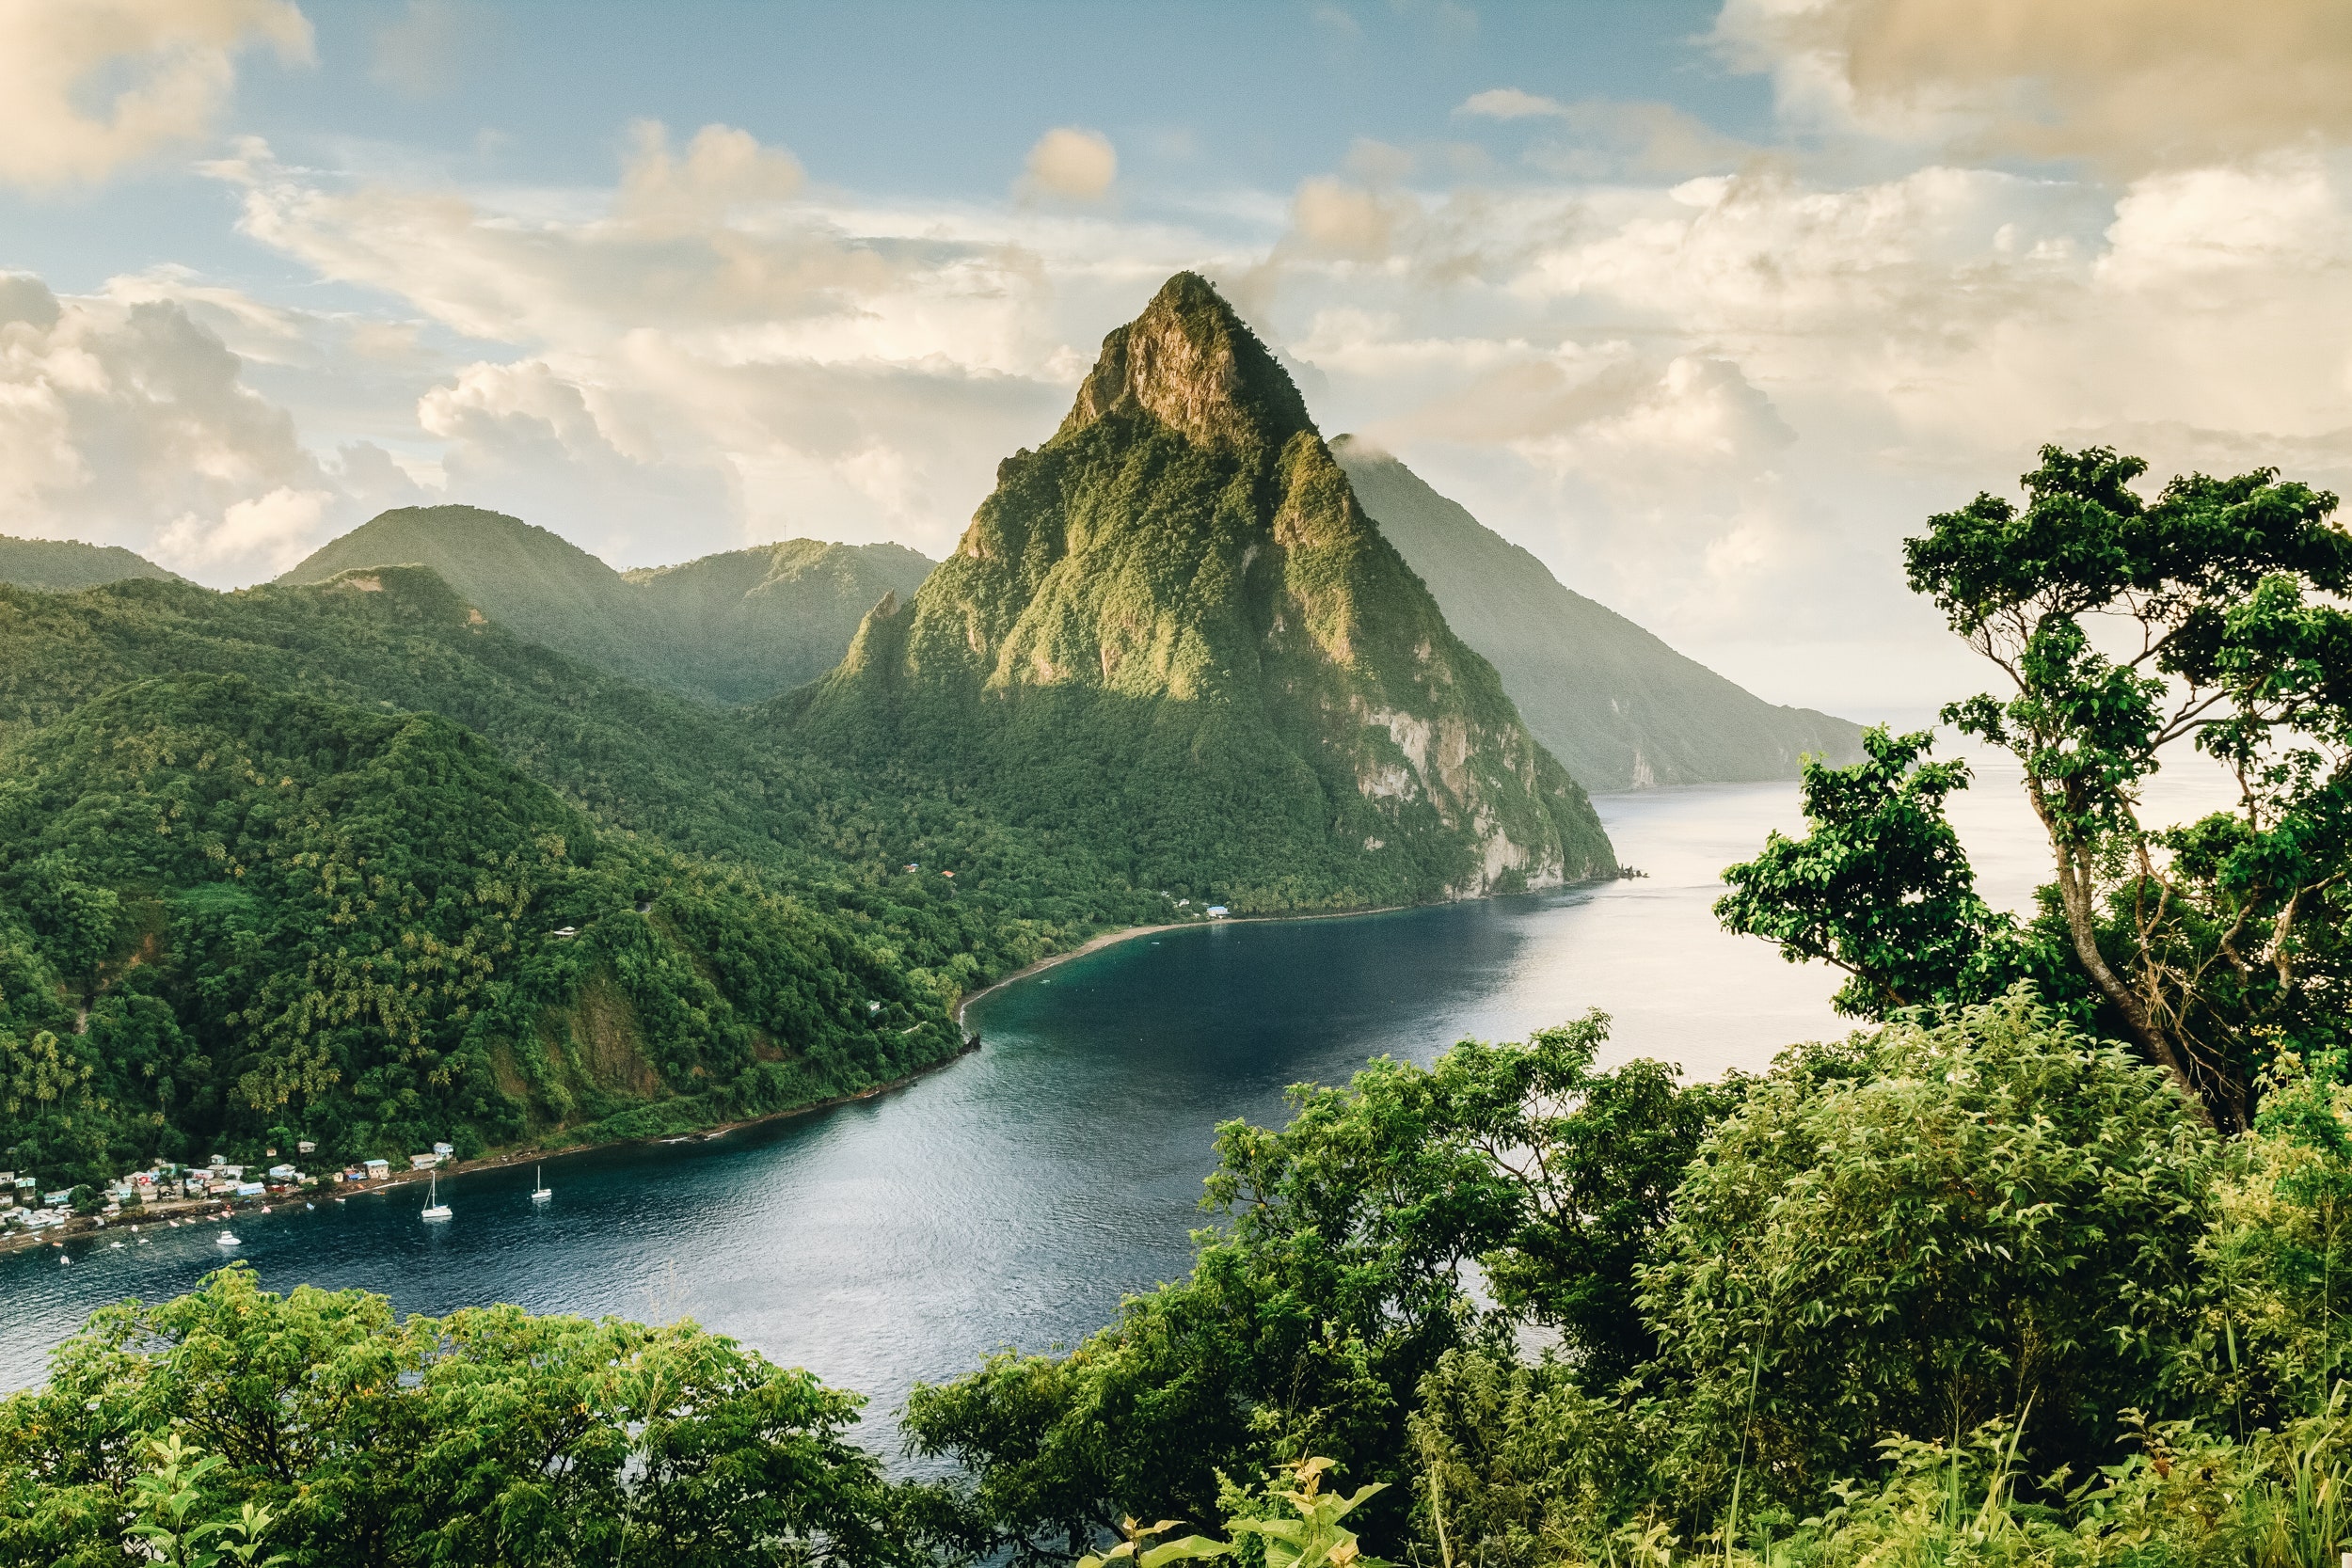 <p>Dreaming of a tropical winter escape? The best Caribbean islands have a little bit of something for everyone, from the brag-worthy hiking trails in St. Lucia to the pastel rainbow of 17th-century buildings in Curaçao. And don’t forget about the resorts, which number among the absolute <a href="https://www.cntraveler.com/gallery/best-resorts-in-the-world?mbid=synd_msn_rss&utm_source=msn&utm_medium=syndication">best in the world</a>.</p> <p>With this in mind, we’ve selected the best <a href="https://www.cntraveler.com/story/how-3-caribbean-destinations-are-welcoming-visitors-back?mbid=synd_msn_rss&utm_source=msn&utm_medium=syndication">Caribbean islands</a> for travelers—whether you’re interested in nature, food, or just those pristine beaches—to help you plan your next warm-weather getaway.</p> <p>Let the daydreaming begin.</p> <p><em>This article was originally published in March 2016. It has been updated with new information.</em></p><p>Sign up to receive the latest news, expert tips, and inspiration on all things travel</p><a href="https://www.cntraveler.com/newsletter/the-daily?sourceCode=msnsend">Inspire Me</a>